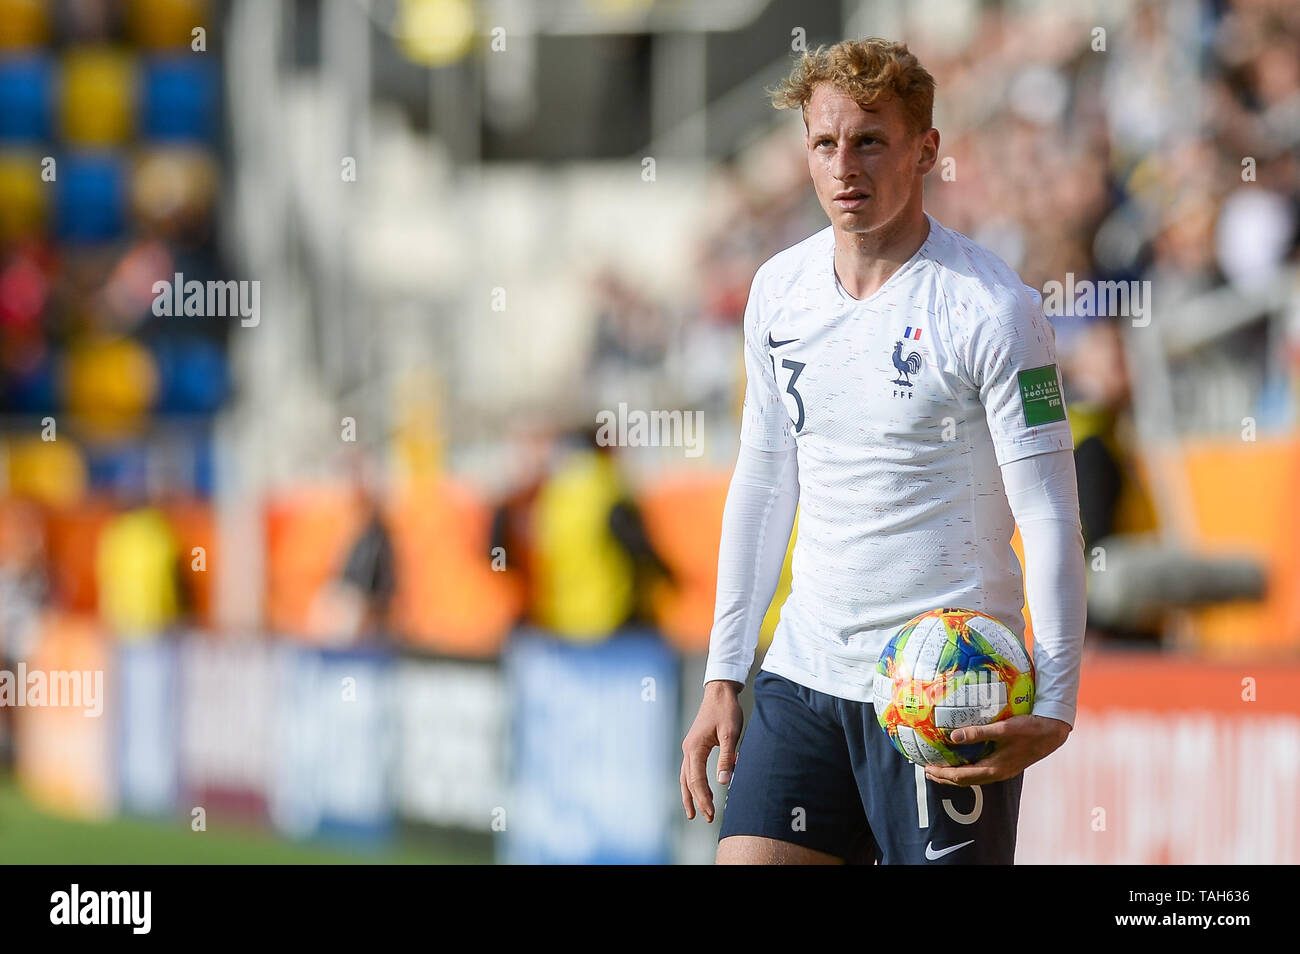 Nicolas Cozza from France seen in action during FIFA U-20 World Cup match between France and Saudi Arabia (GROUP E) in Gdynia. ( Final score; France 2:0 Saudi Arabia ) Stock Photo